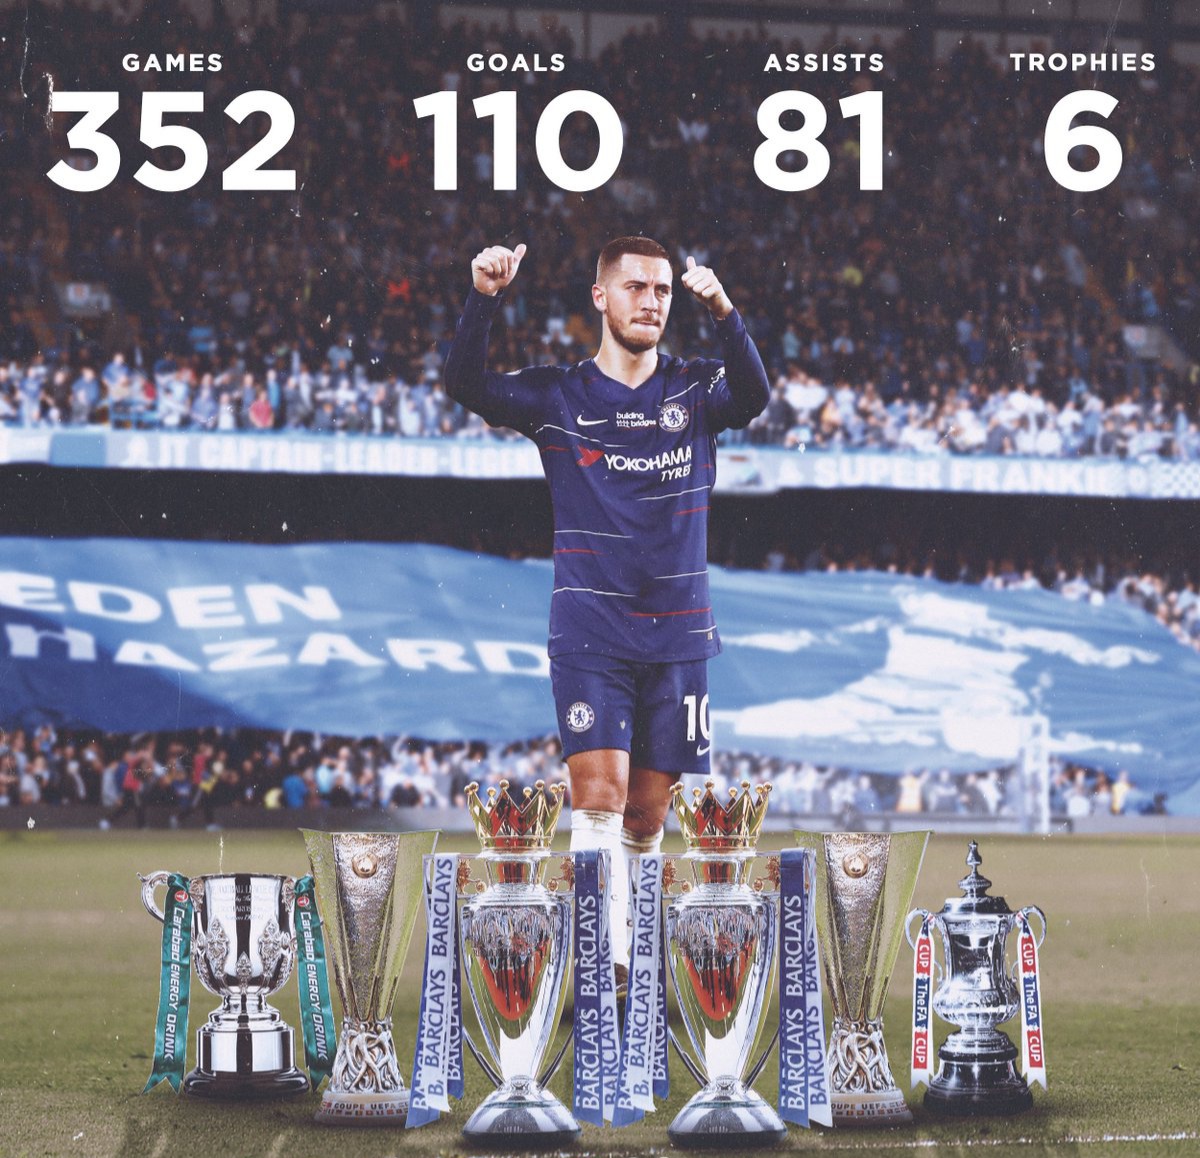 Eden Hazard: One of those players that comes every 10 years , 110 goals 81 assists and 6 trophies later, he became the winger Chelsea needed, he served his time at the bridge giving us titles and many found memories to look back on he will always be seen as a legend